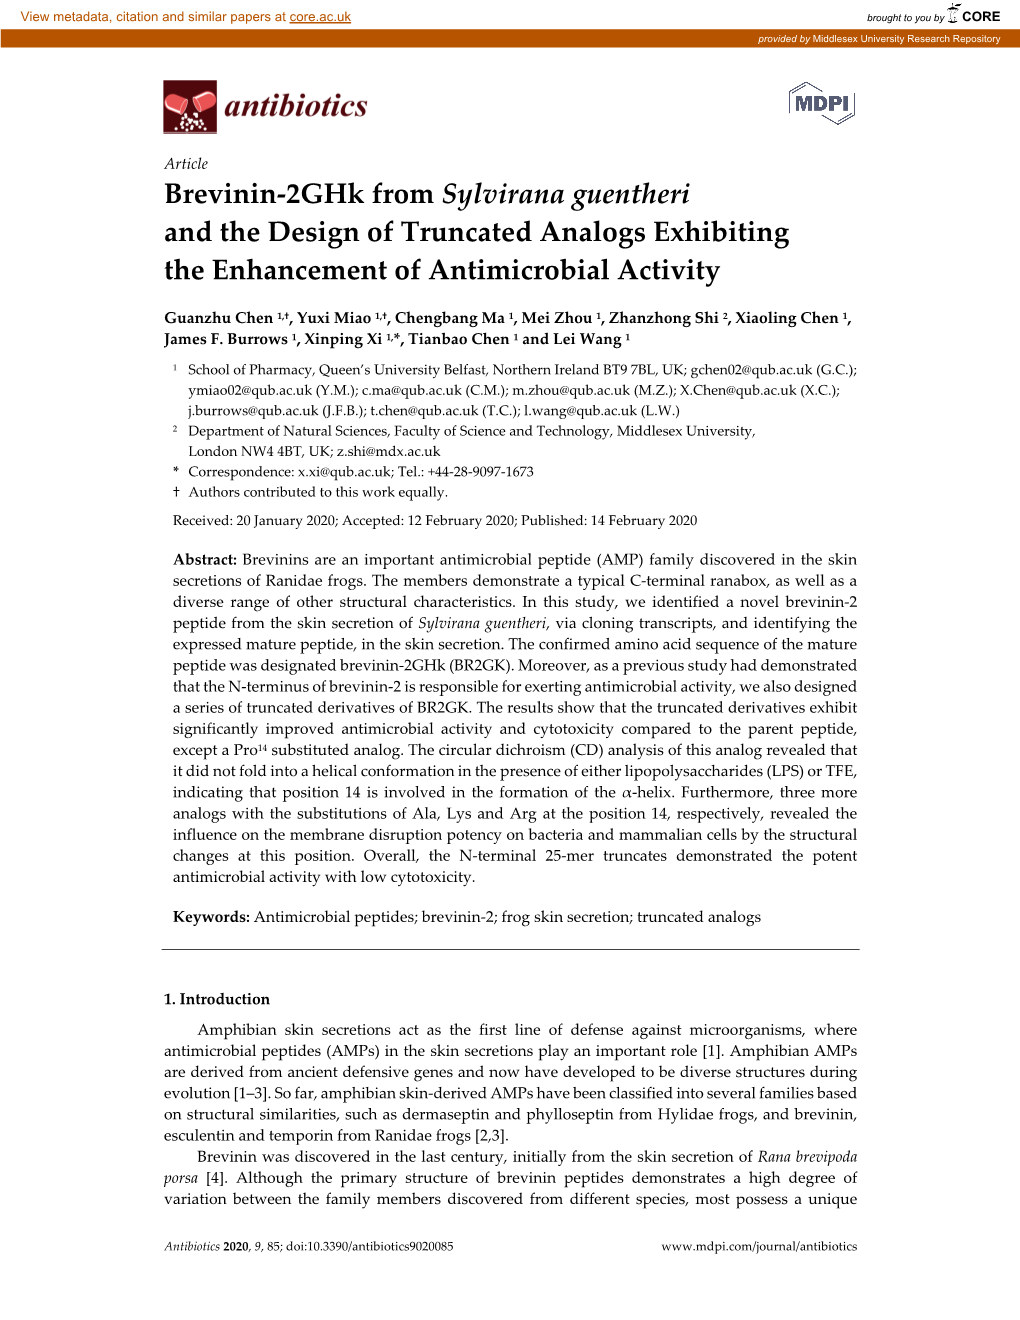 Brevinin-2Ghk from Sylvirana Guentheri and the Design